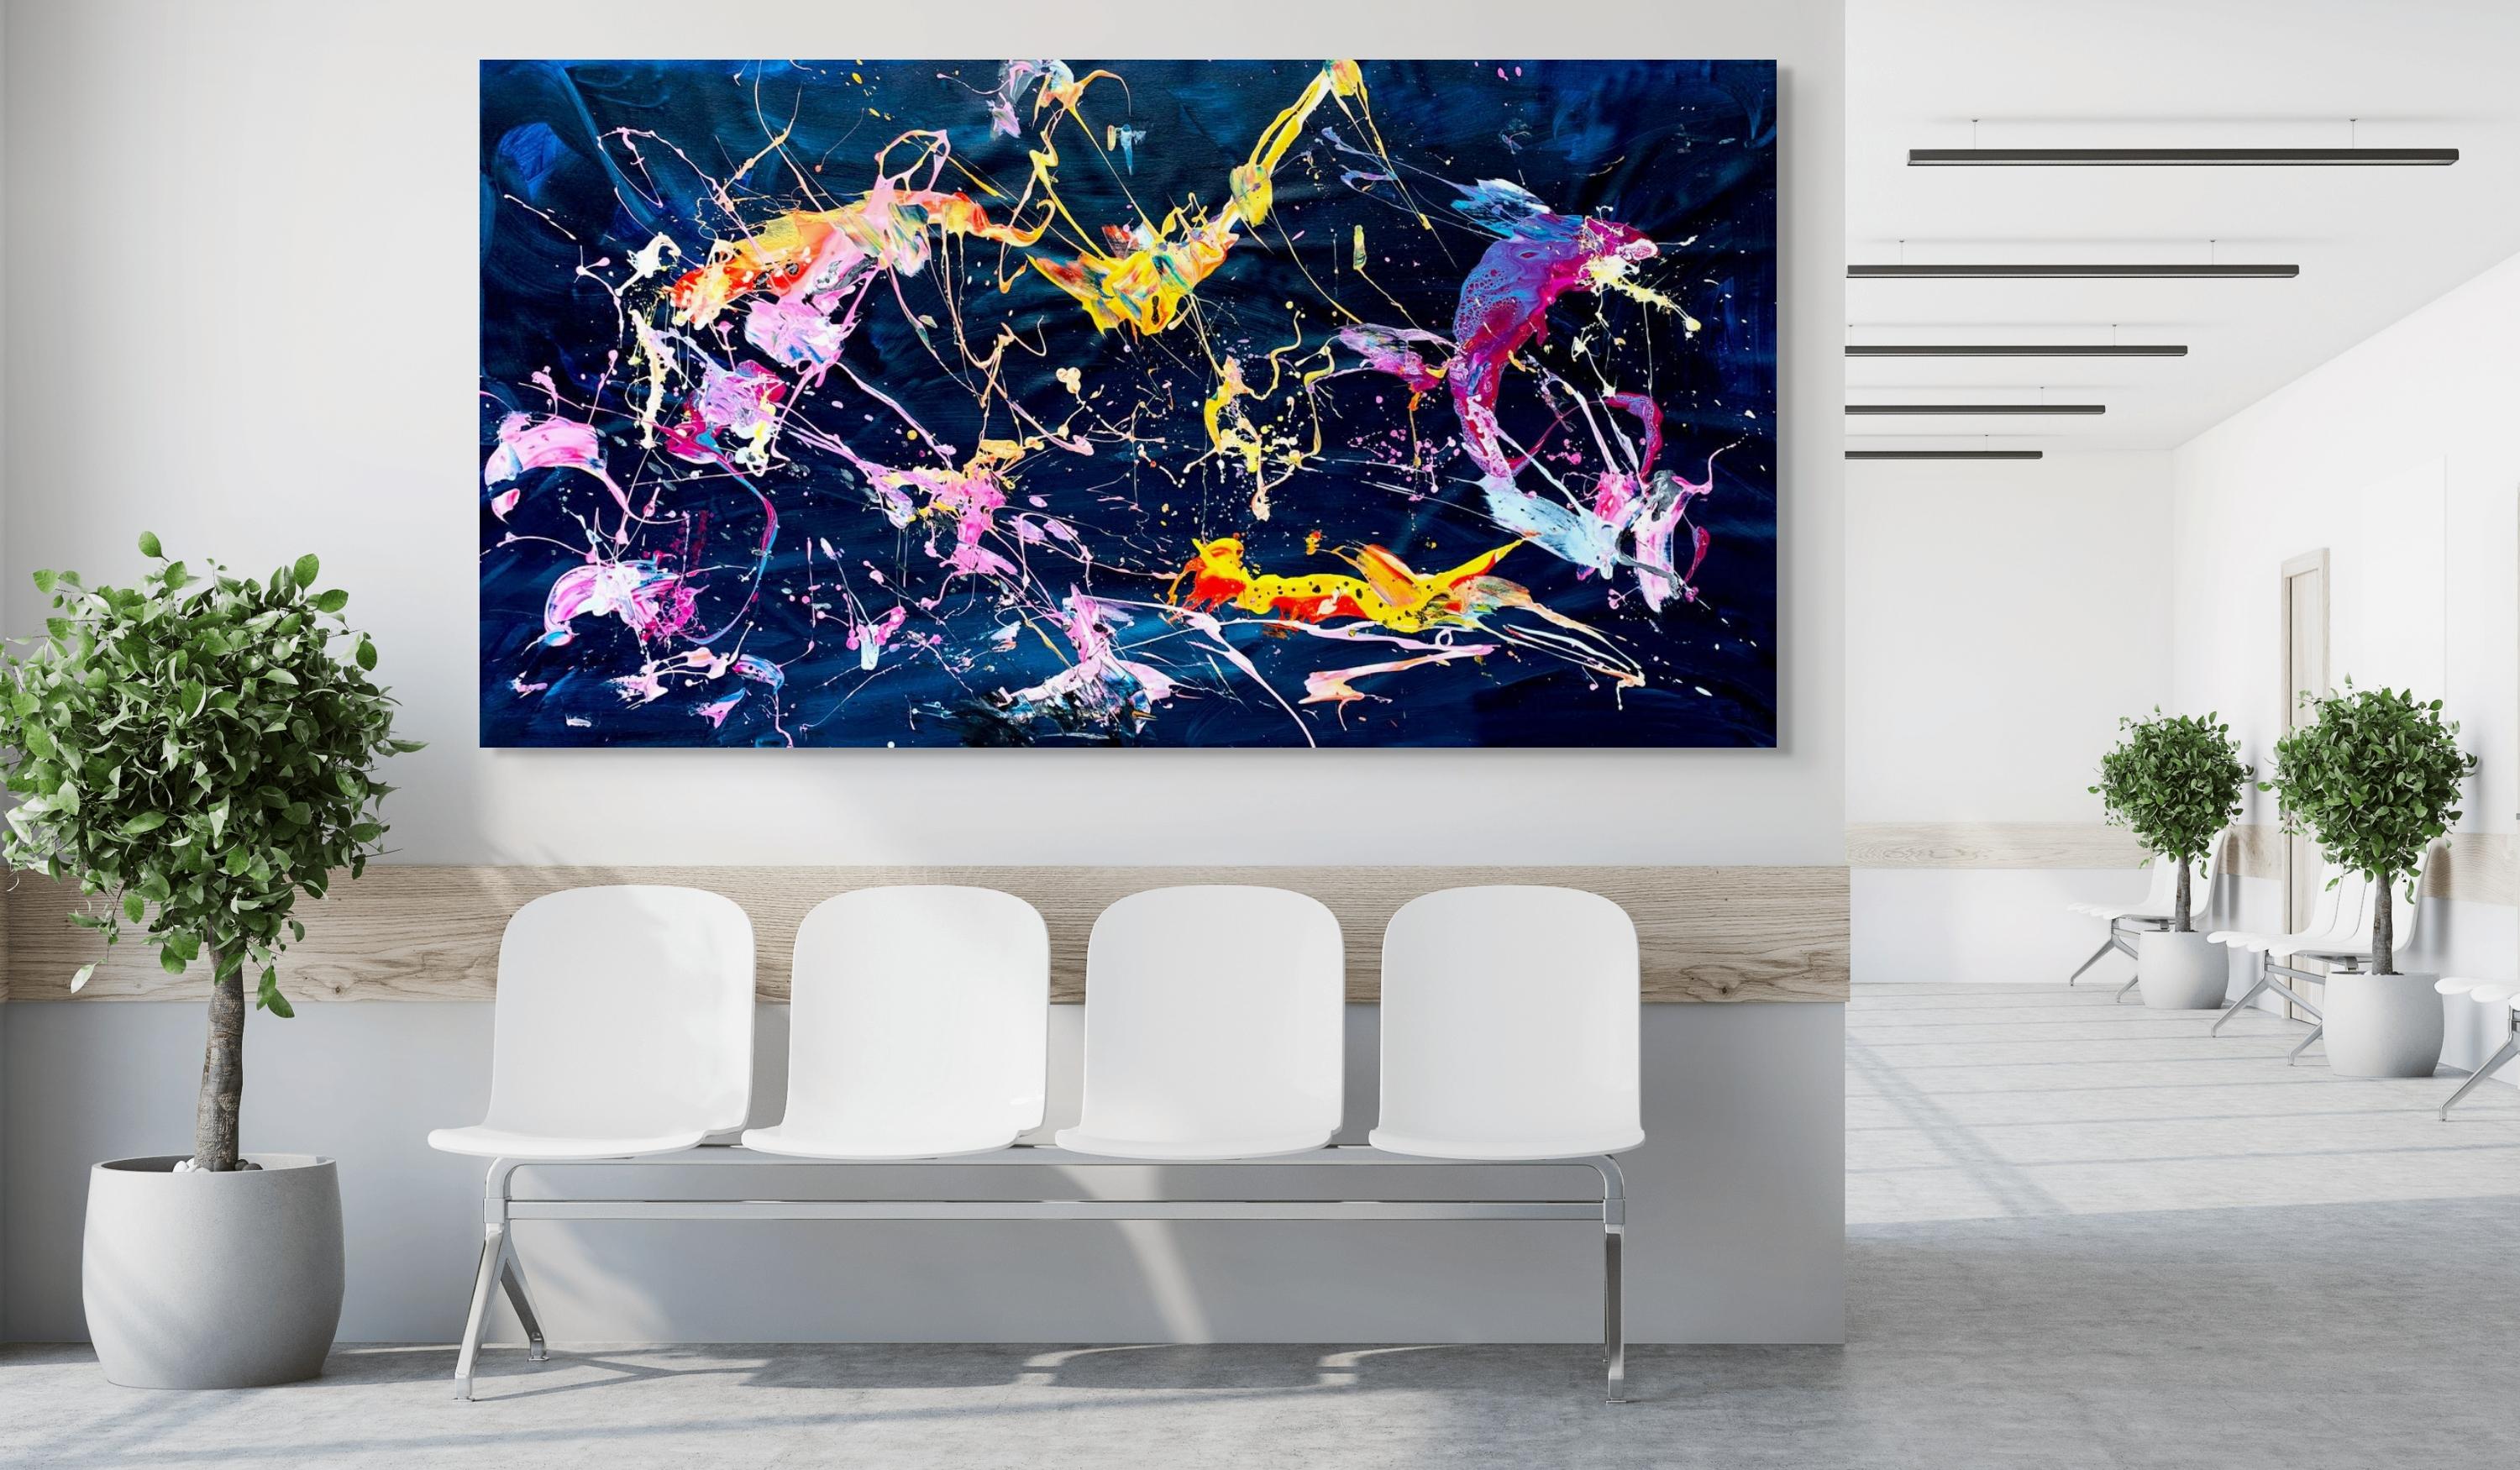 Deep Sea Creatures - The Pond - Painting by Estelle Asmodelle